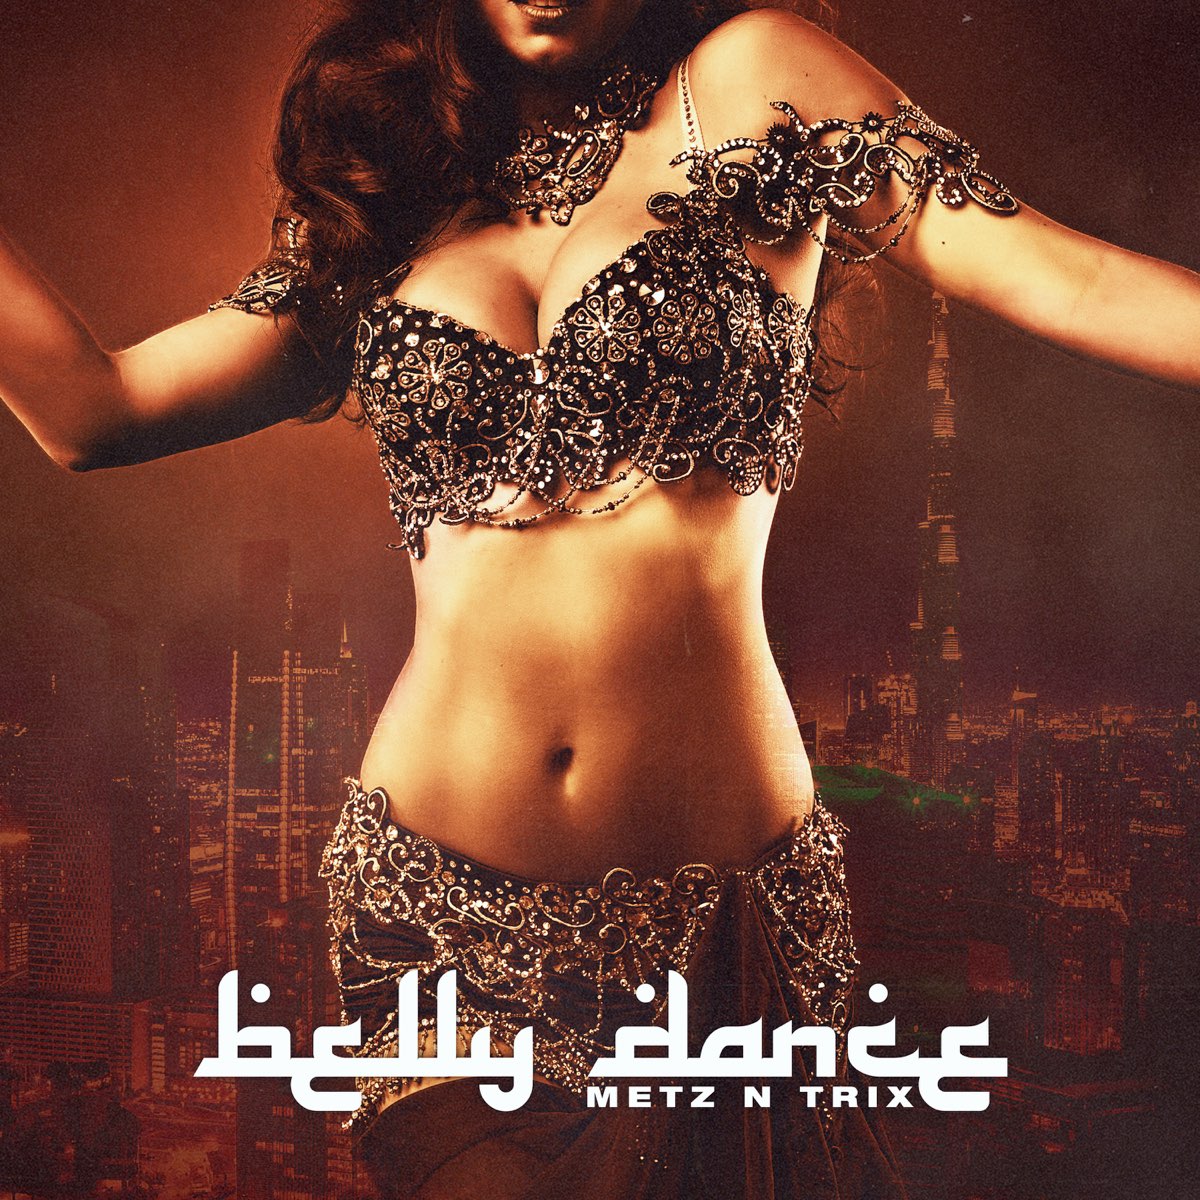 Belly dancer in trouble